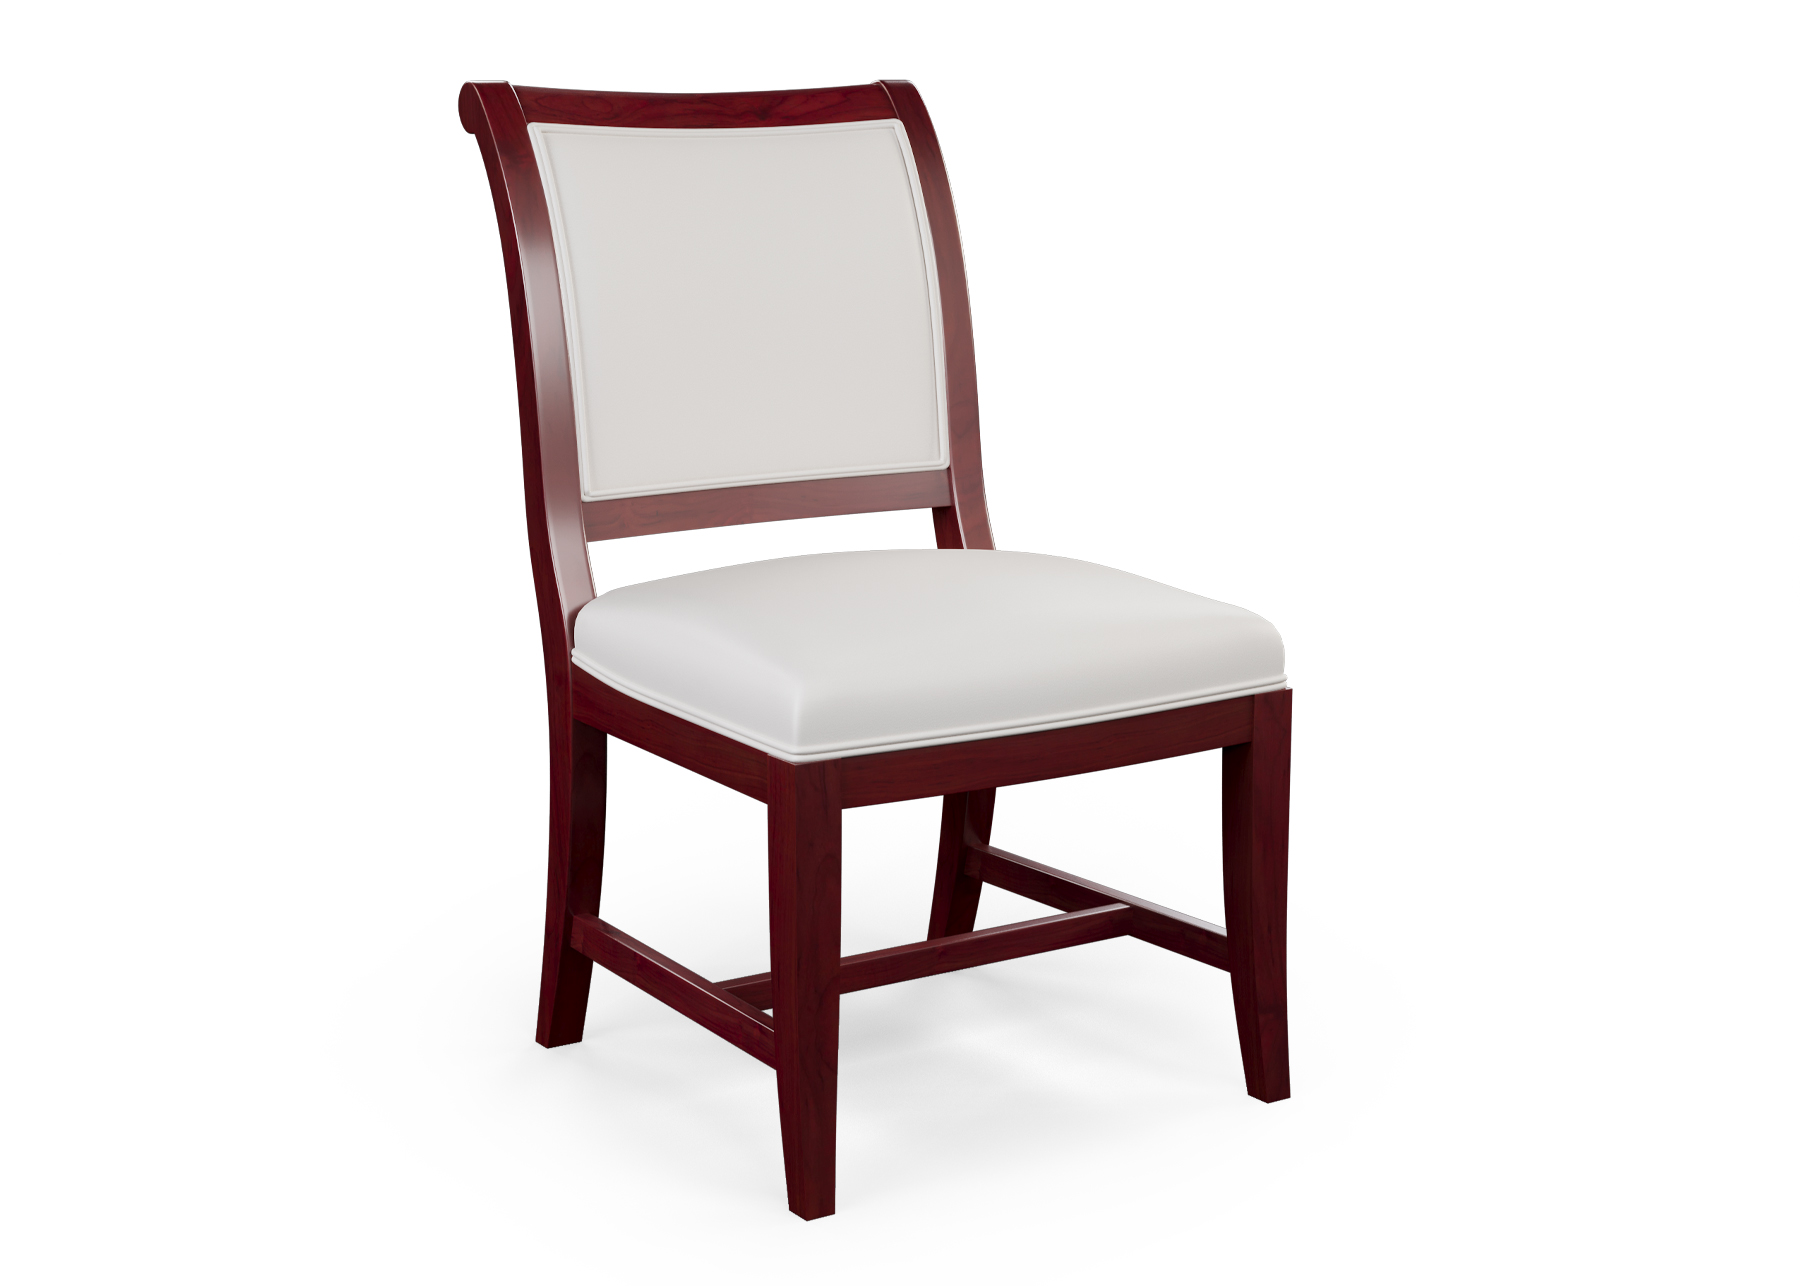  ADMIRAL SIDE CHAIR